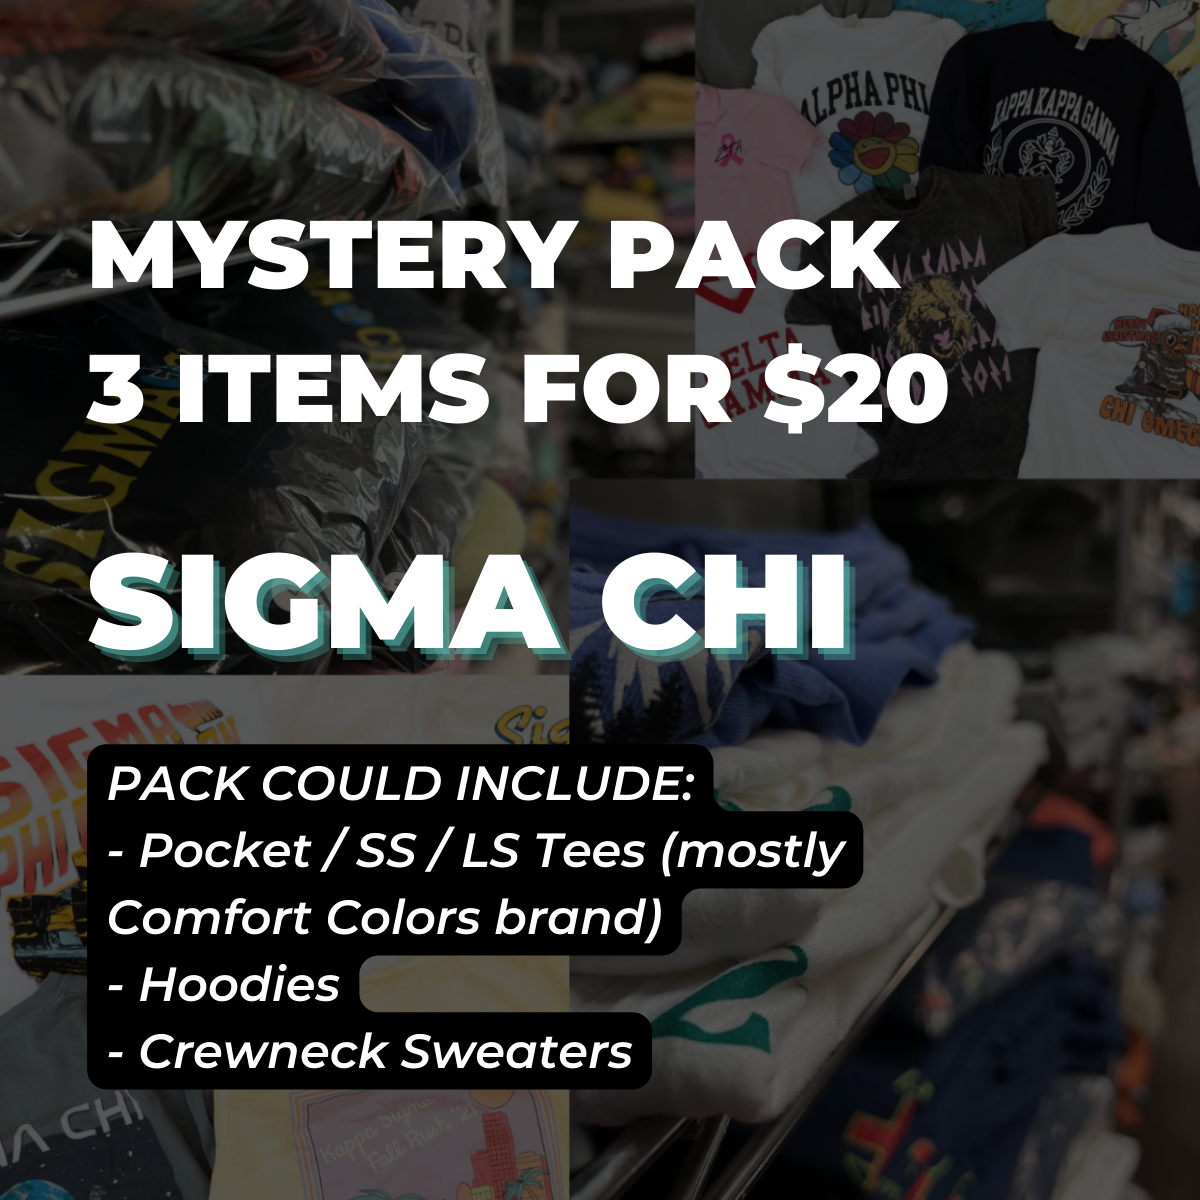 MYSTERY PACK - SIGMA CHI